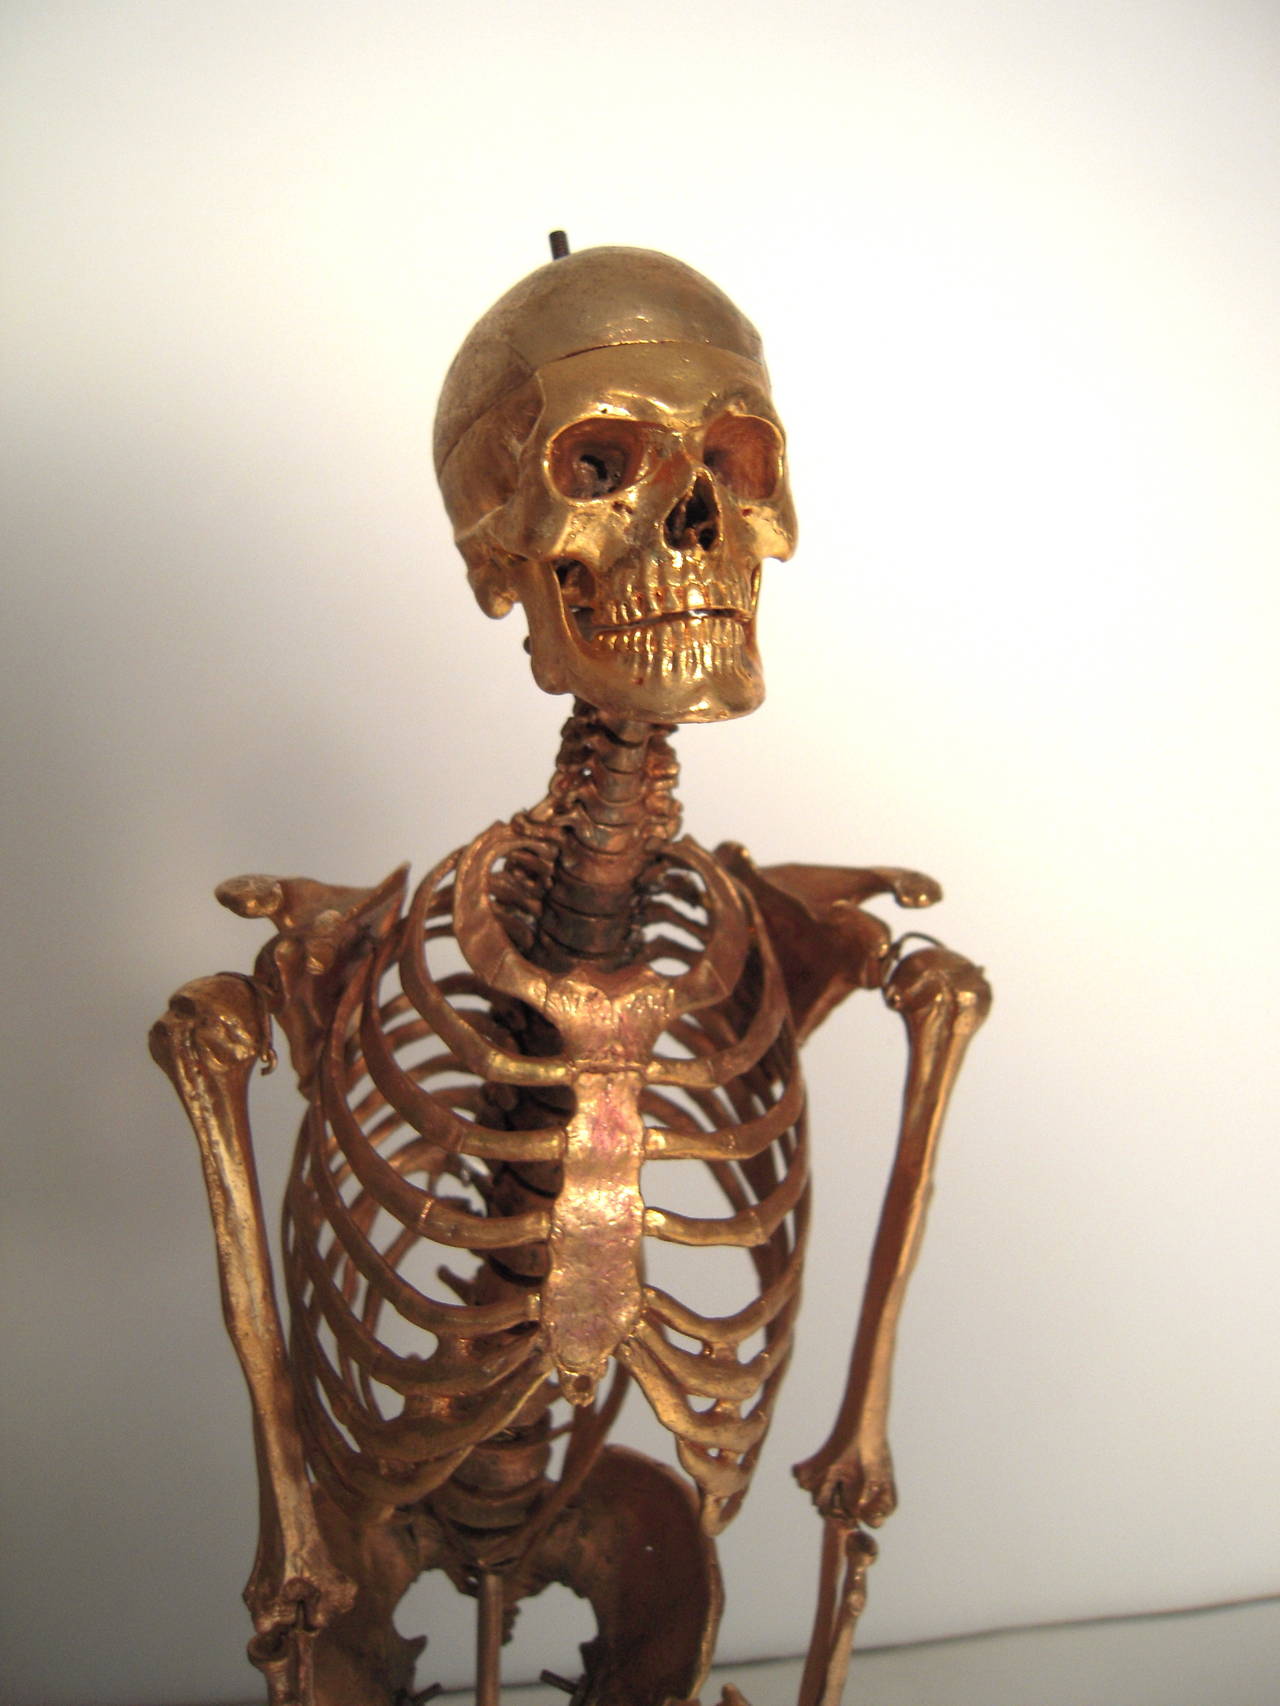 An unusual and finely modeled gilt metal model of a male skeleton, with articulated bones (all except the small bones in the hands and feet), on a black wooden square plinth, embossed with copyright information by Stanley Winters, together with its